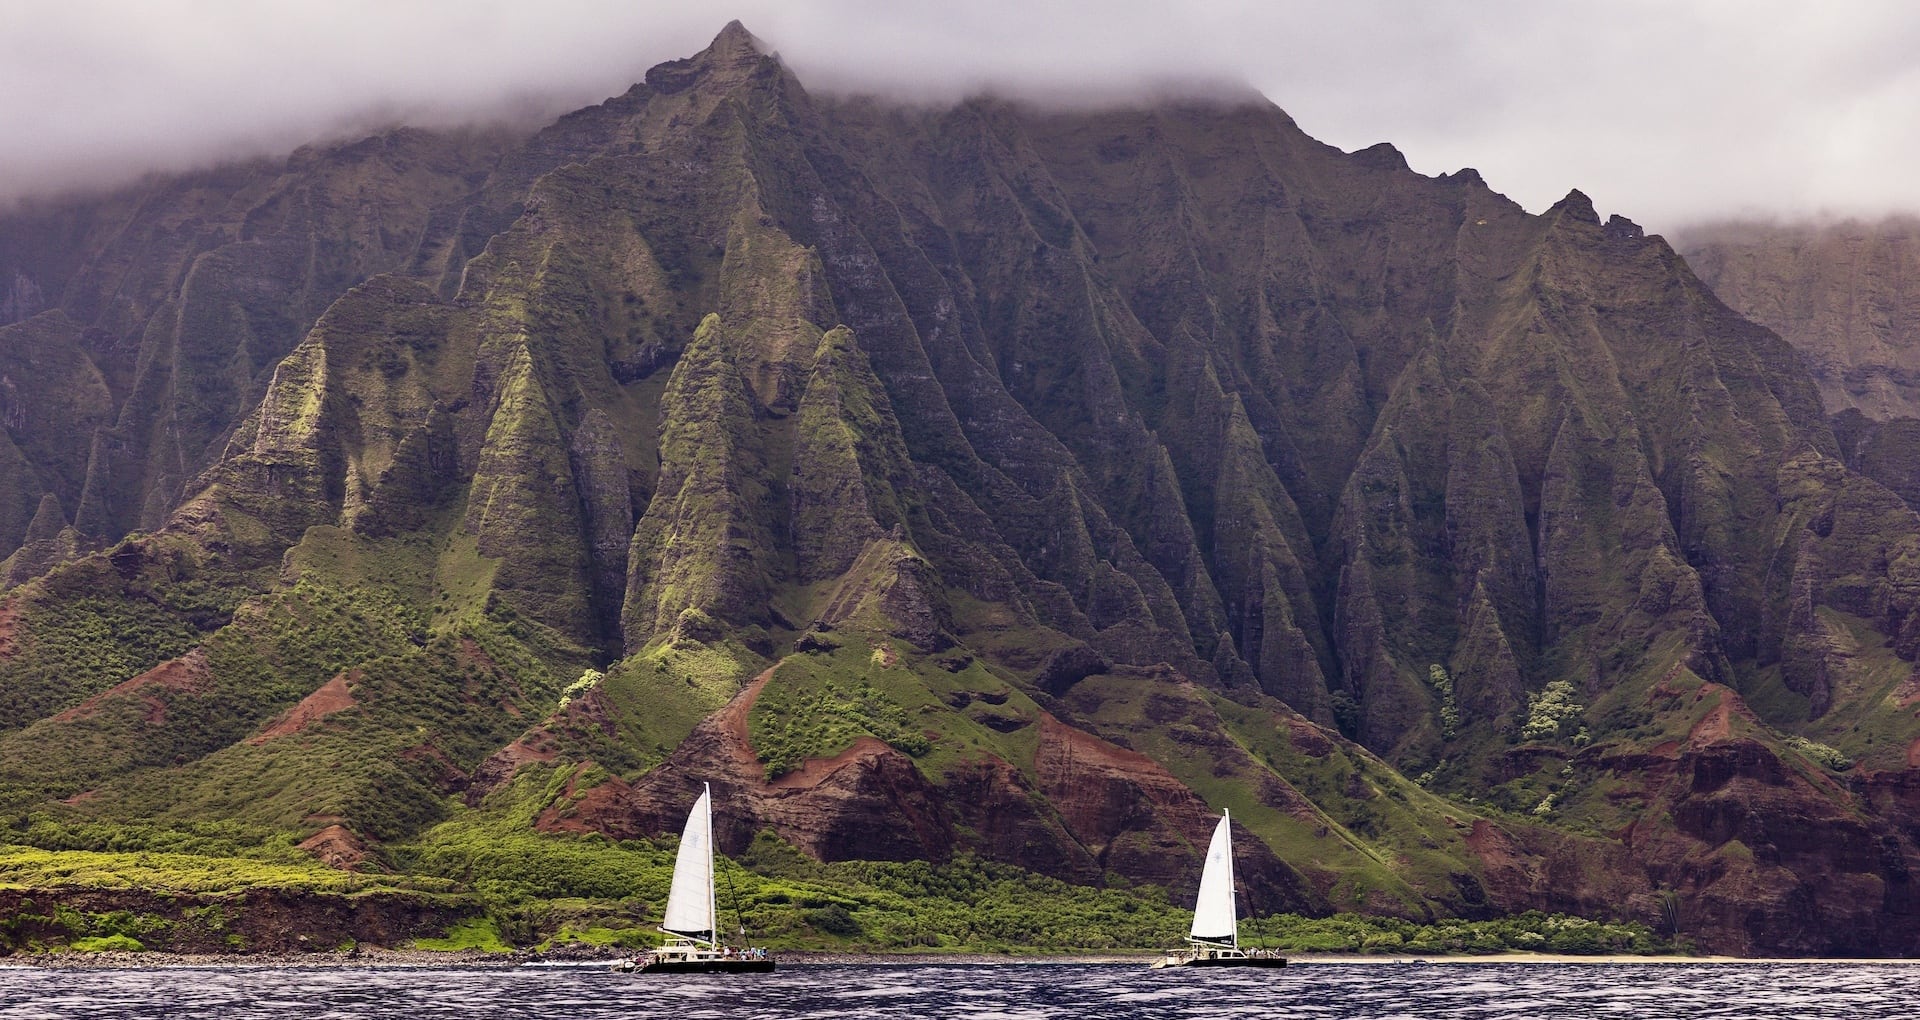 Two sailboats gliding along the base of the towering green cliffs of the Na Pali Coast